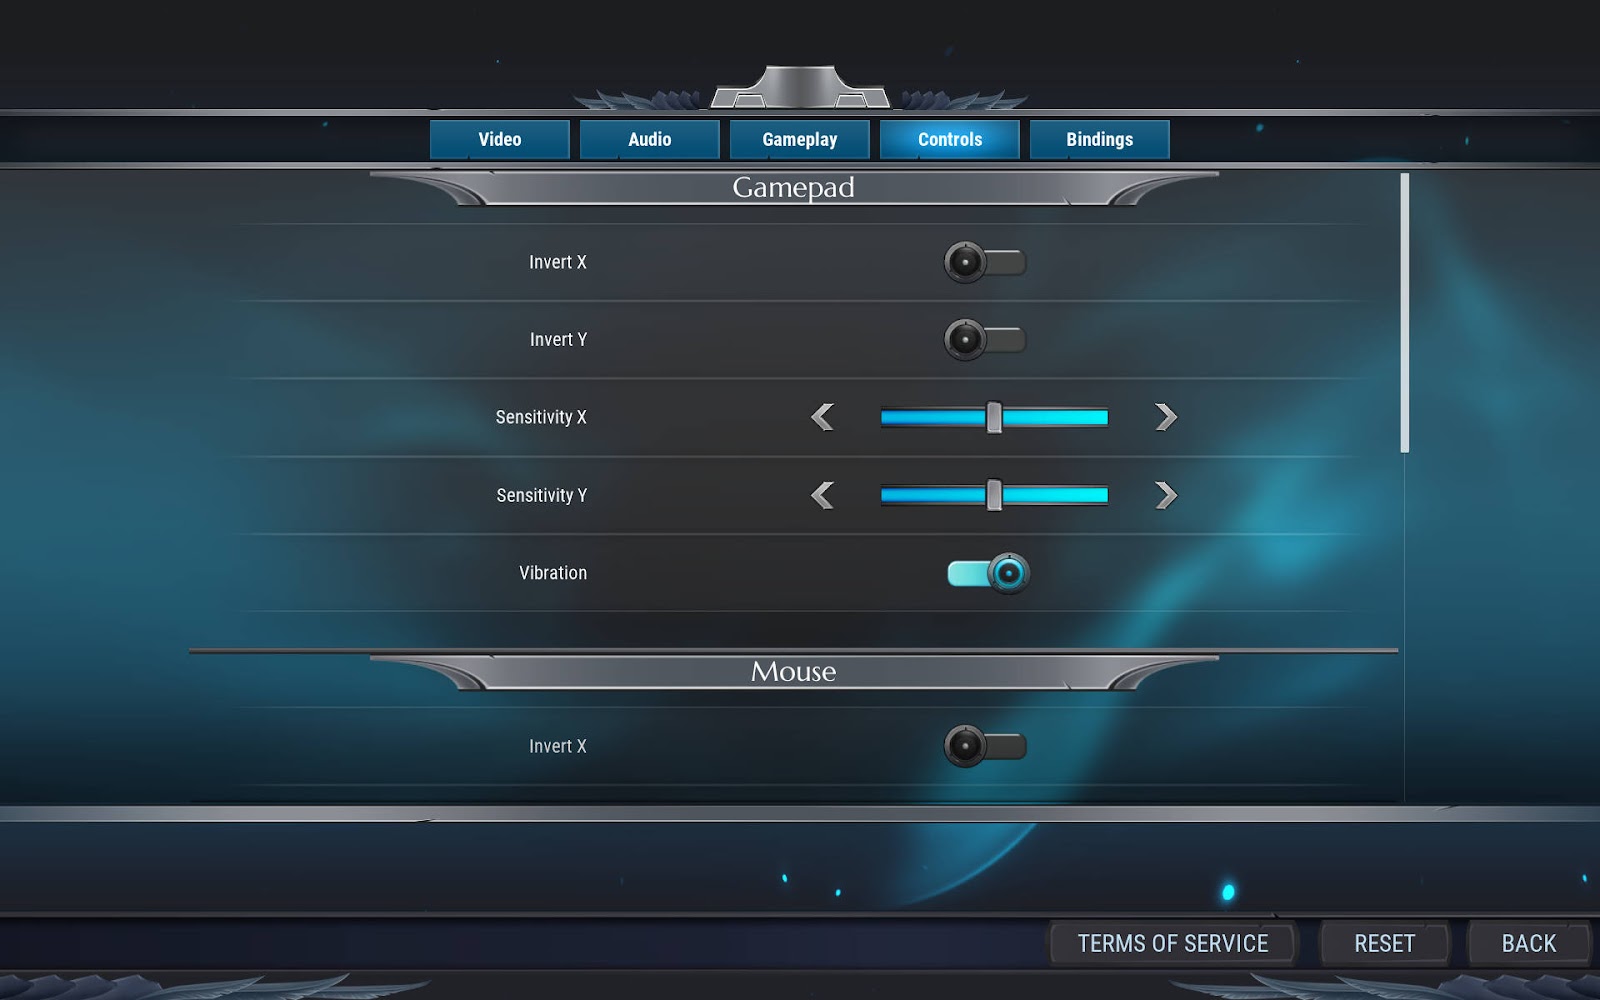 Gamepad axis inversion, sensitivity settings and vibration on/off.